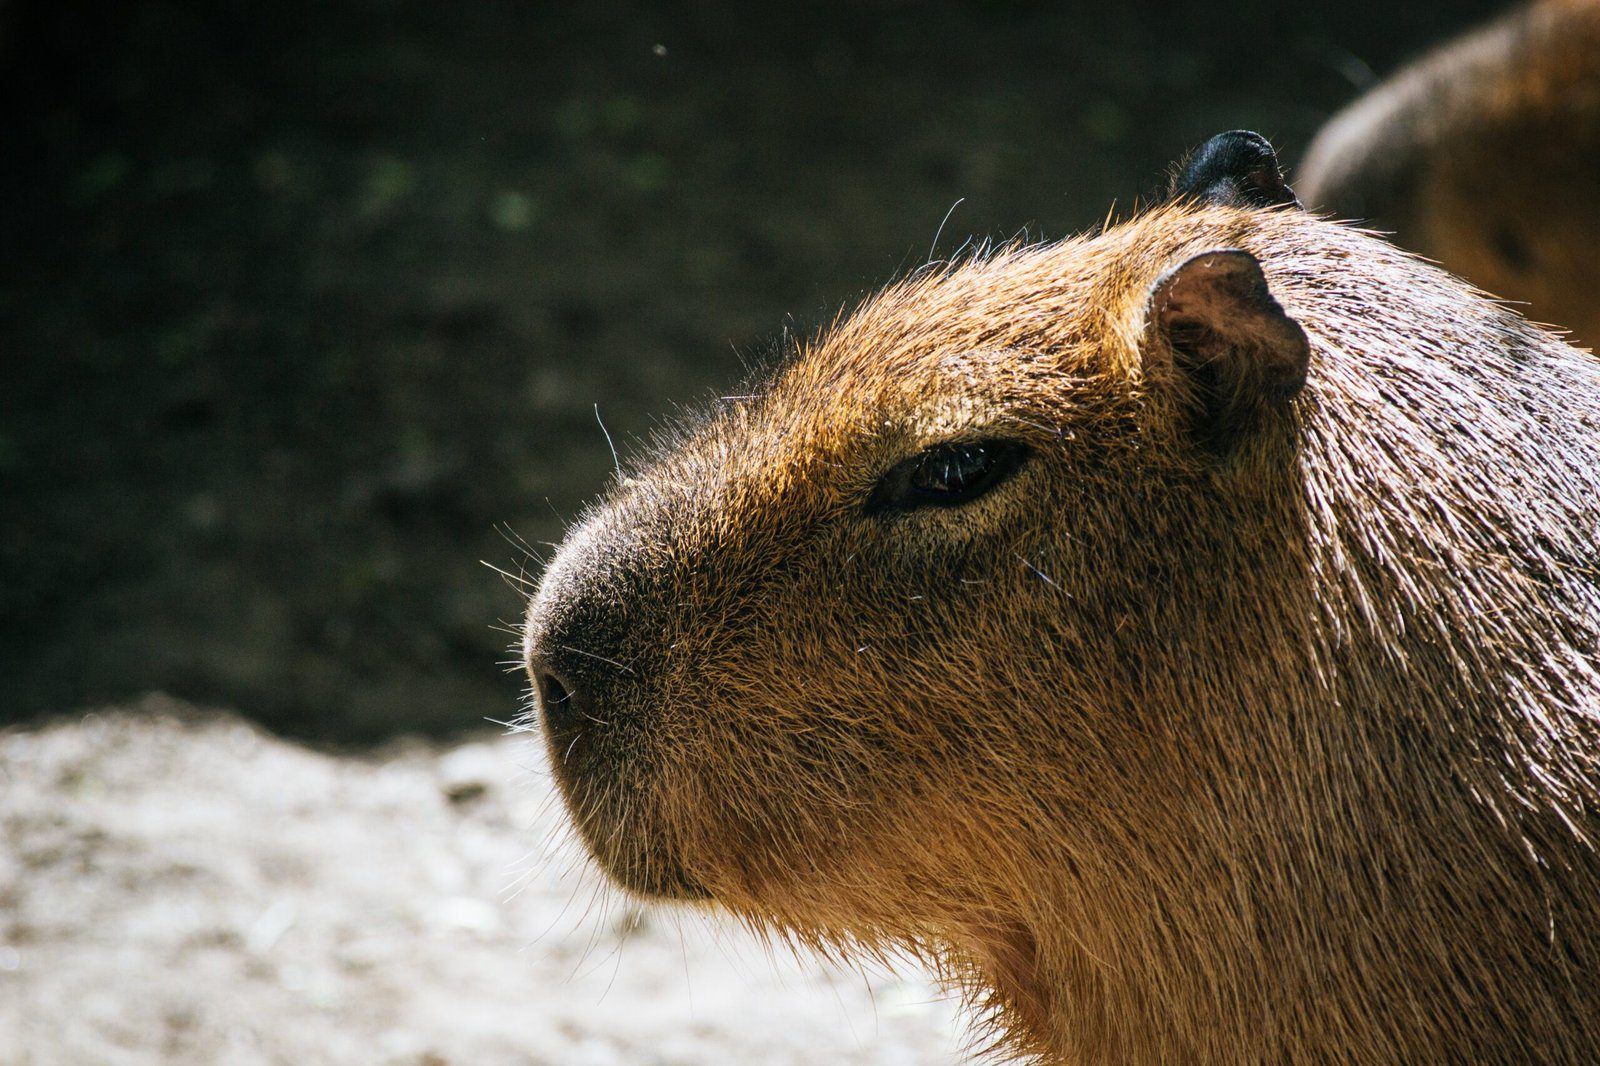 Capybara: The Coolest Animal that Gets Along with Everyone